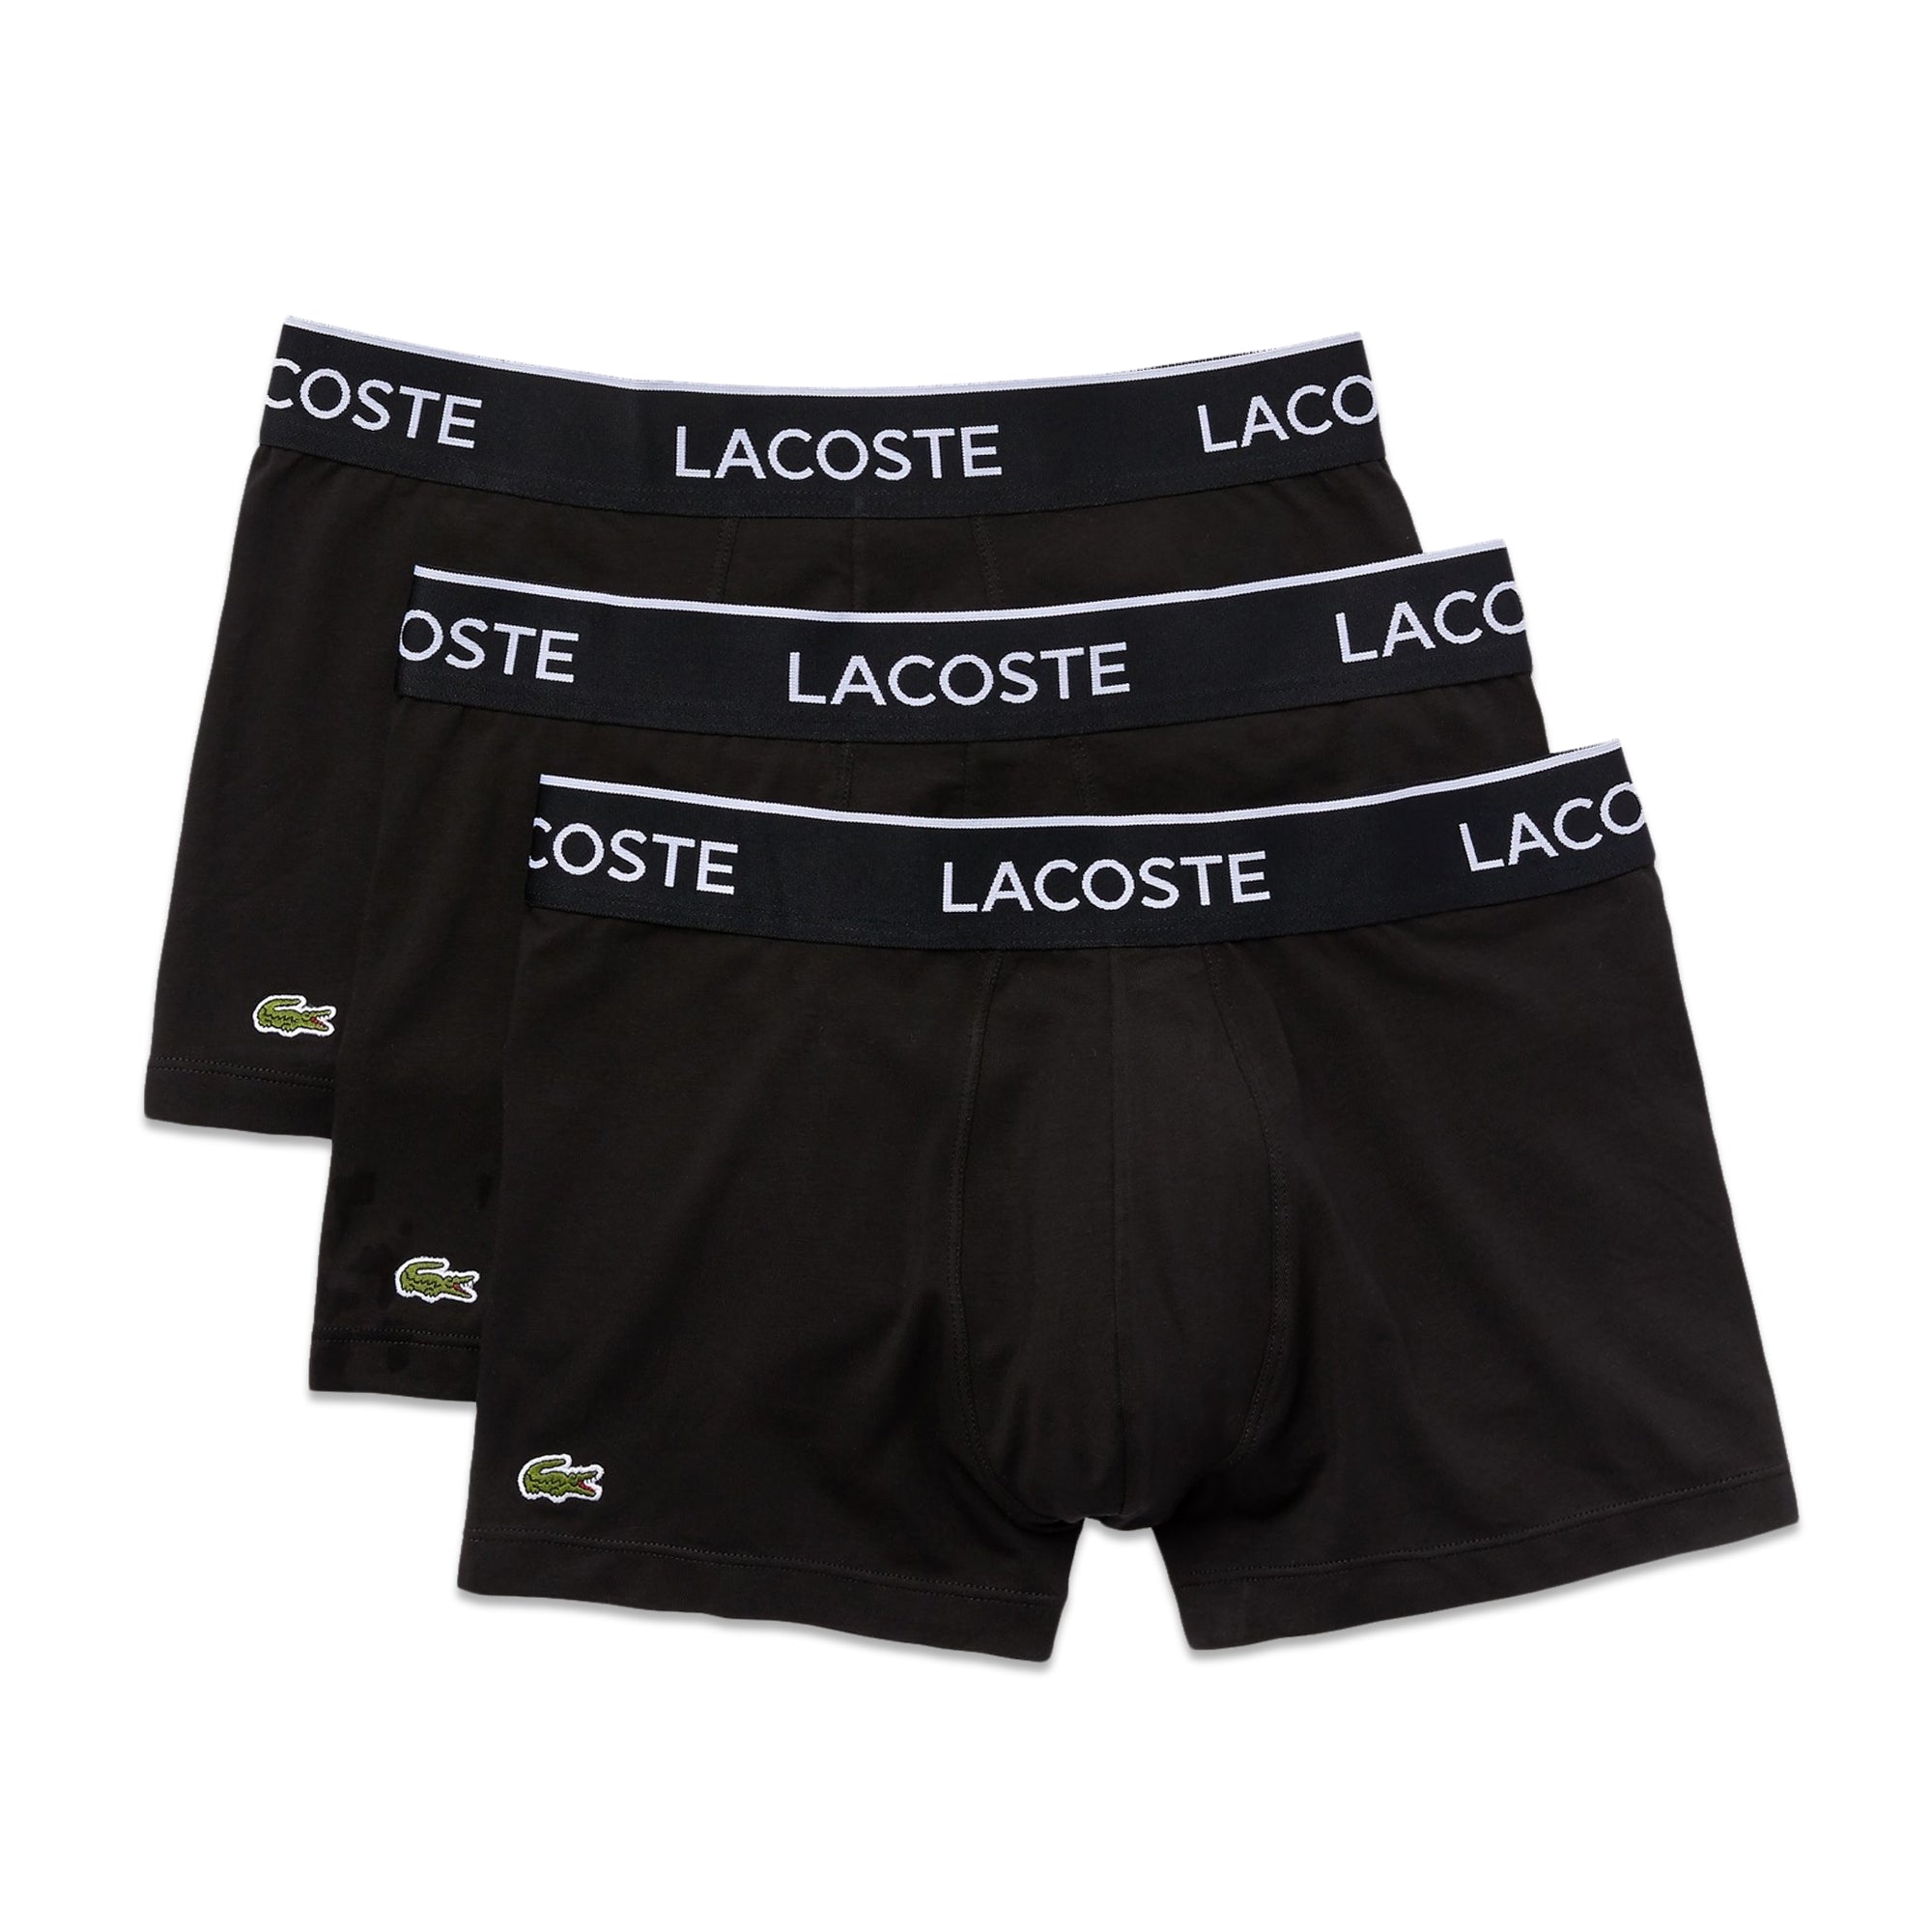 Lacoste 3 Pack Cotton Stretch Trunks - Black